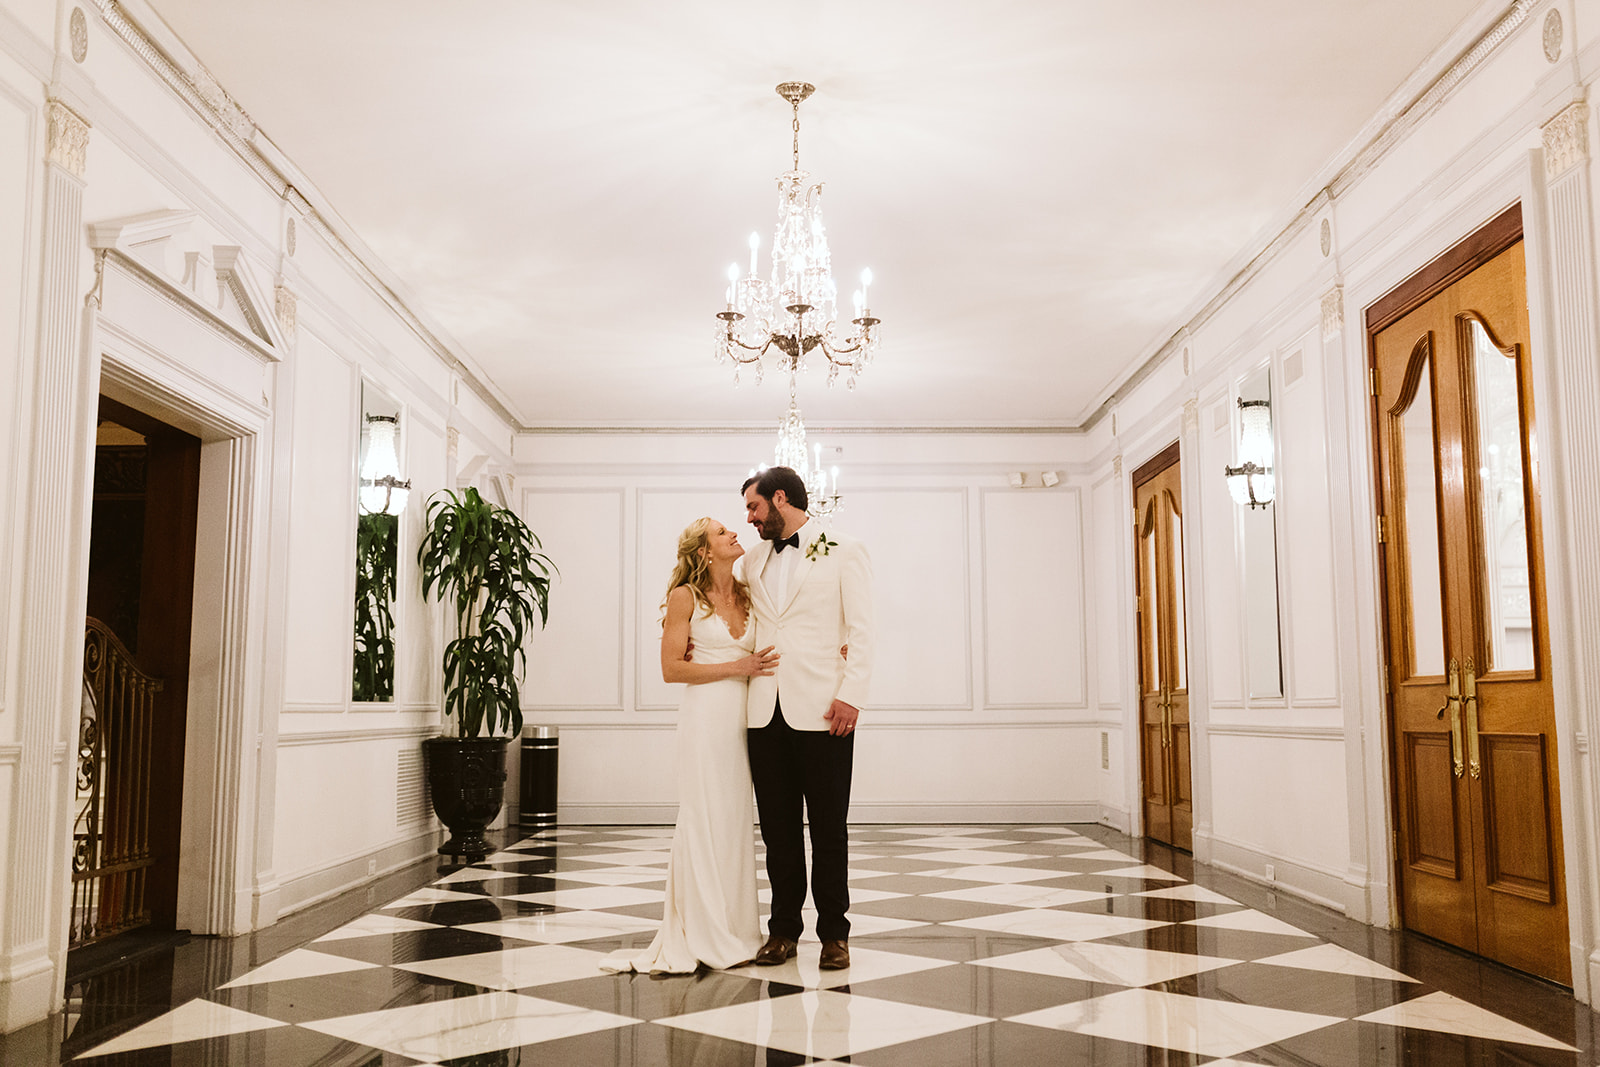 Bride and groom pose together beneath a chandelier at The Read House.